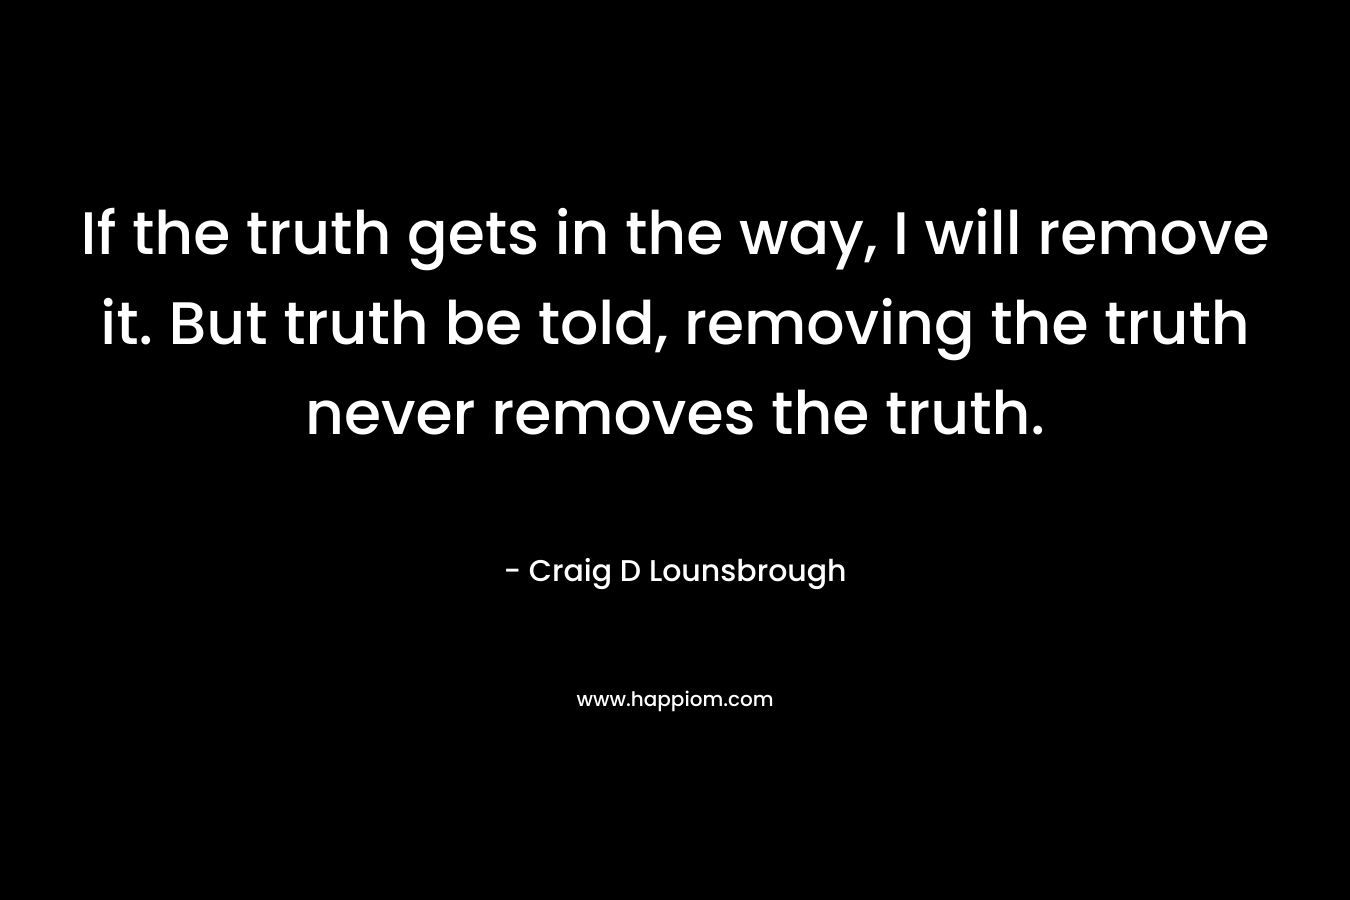 If the truth gets in the way, I will remove it. But truth be told, removing the truth never removes the truth. – Craig D Lounsbrough